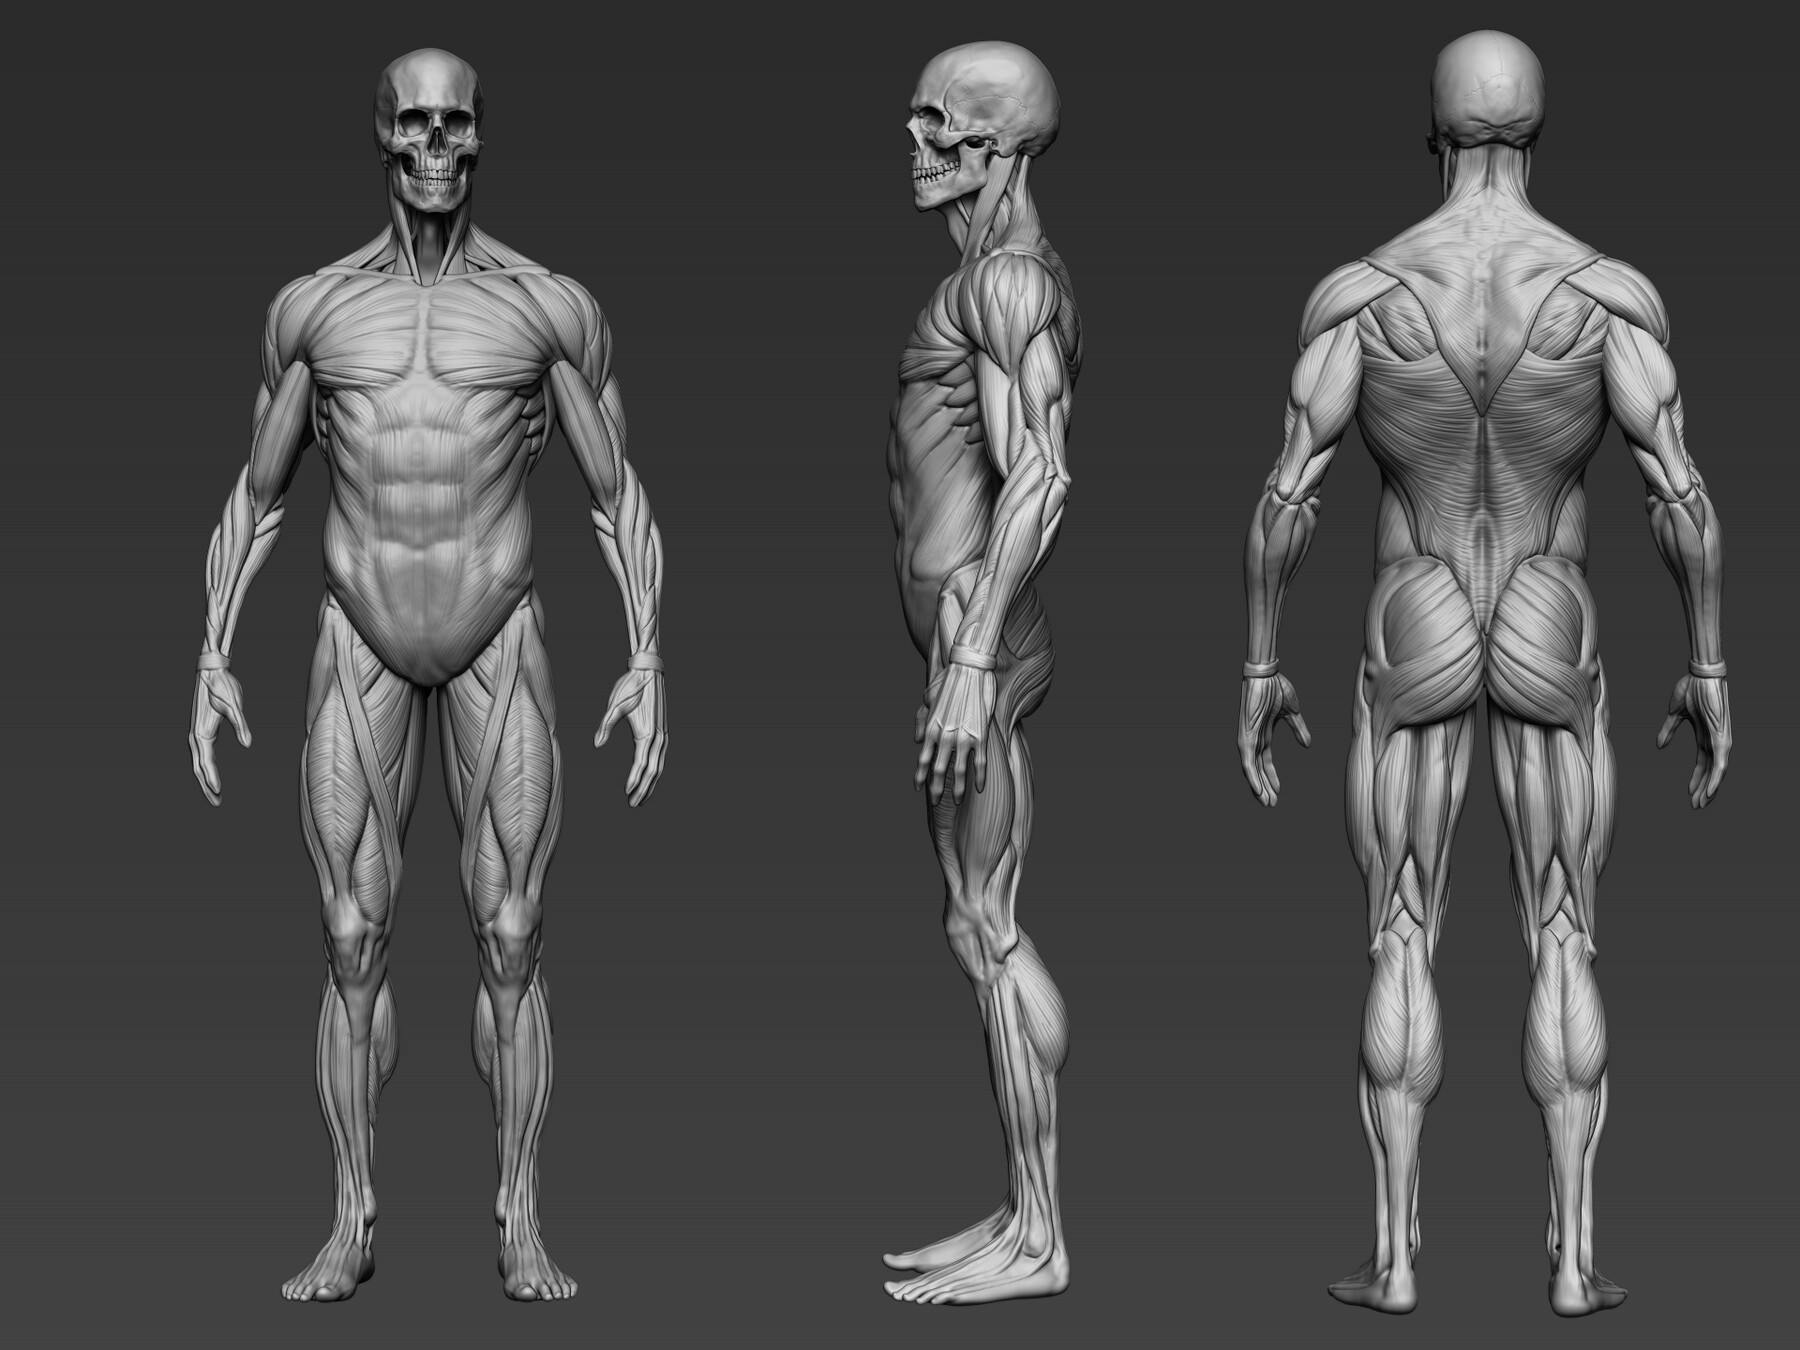 3D Anatomy Reference For Artists - ARTISTS HUO